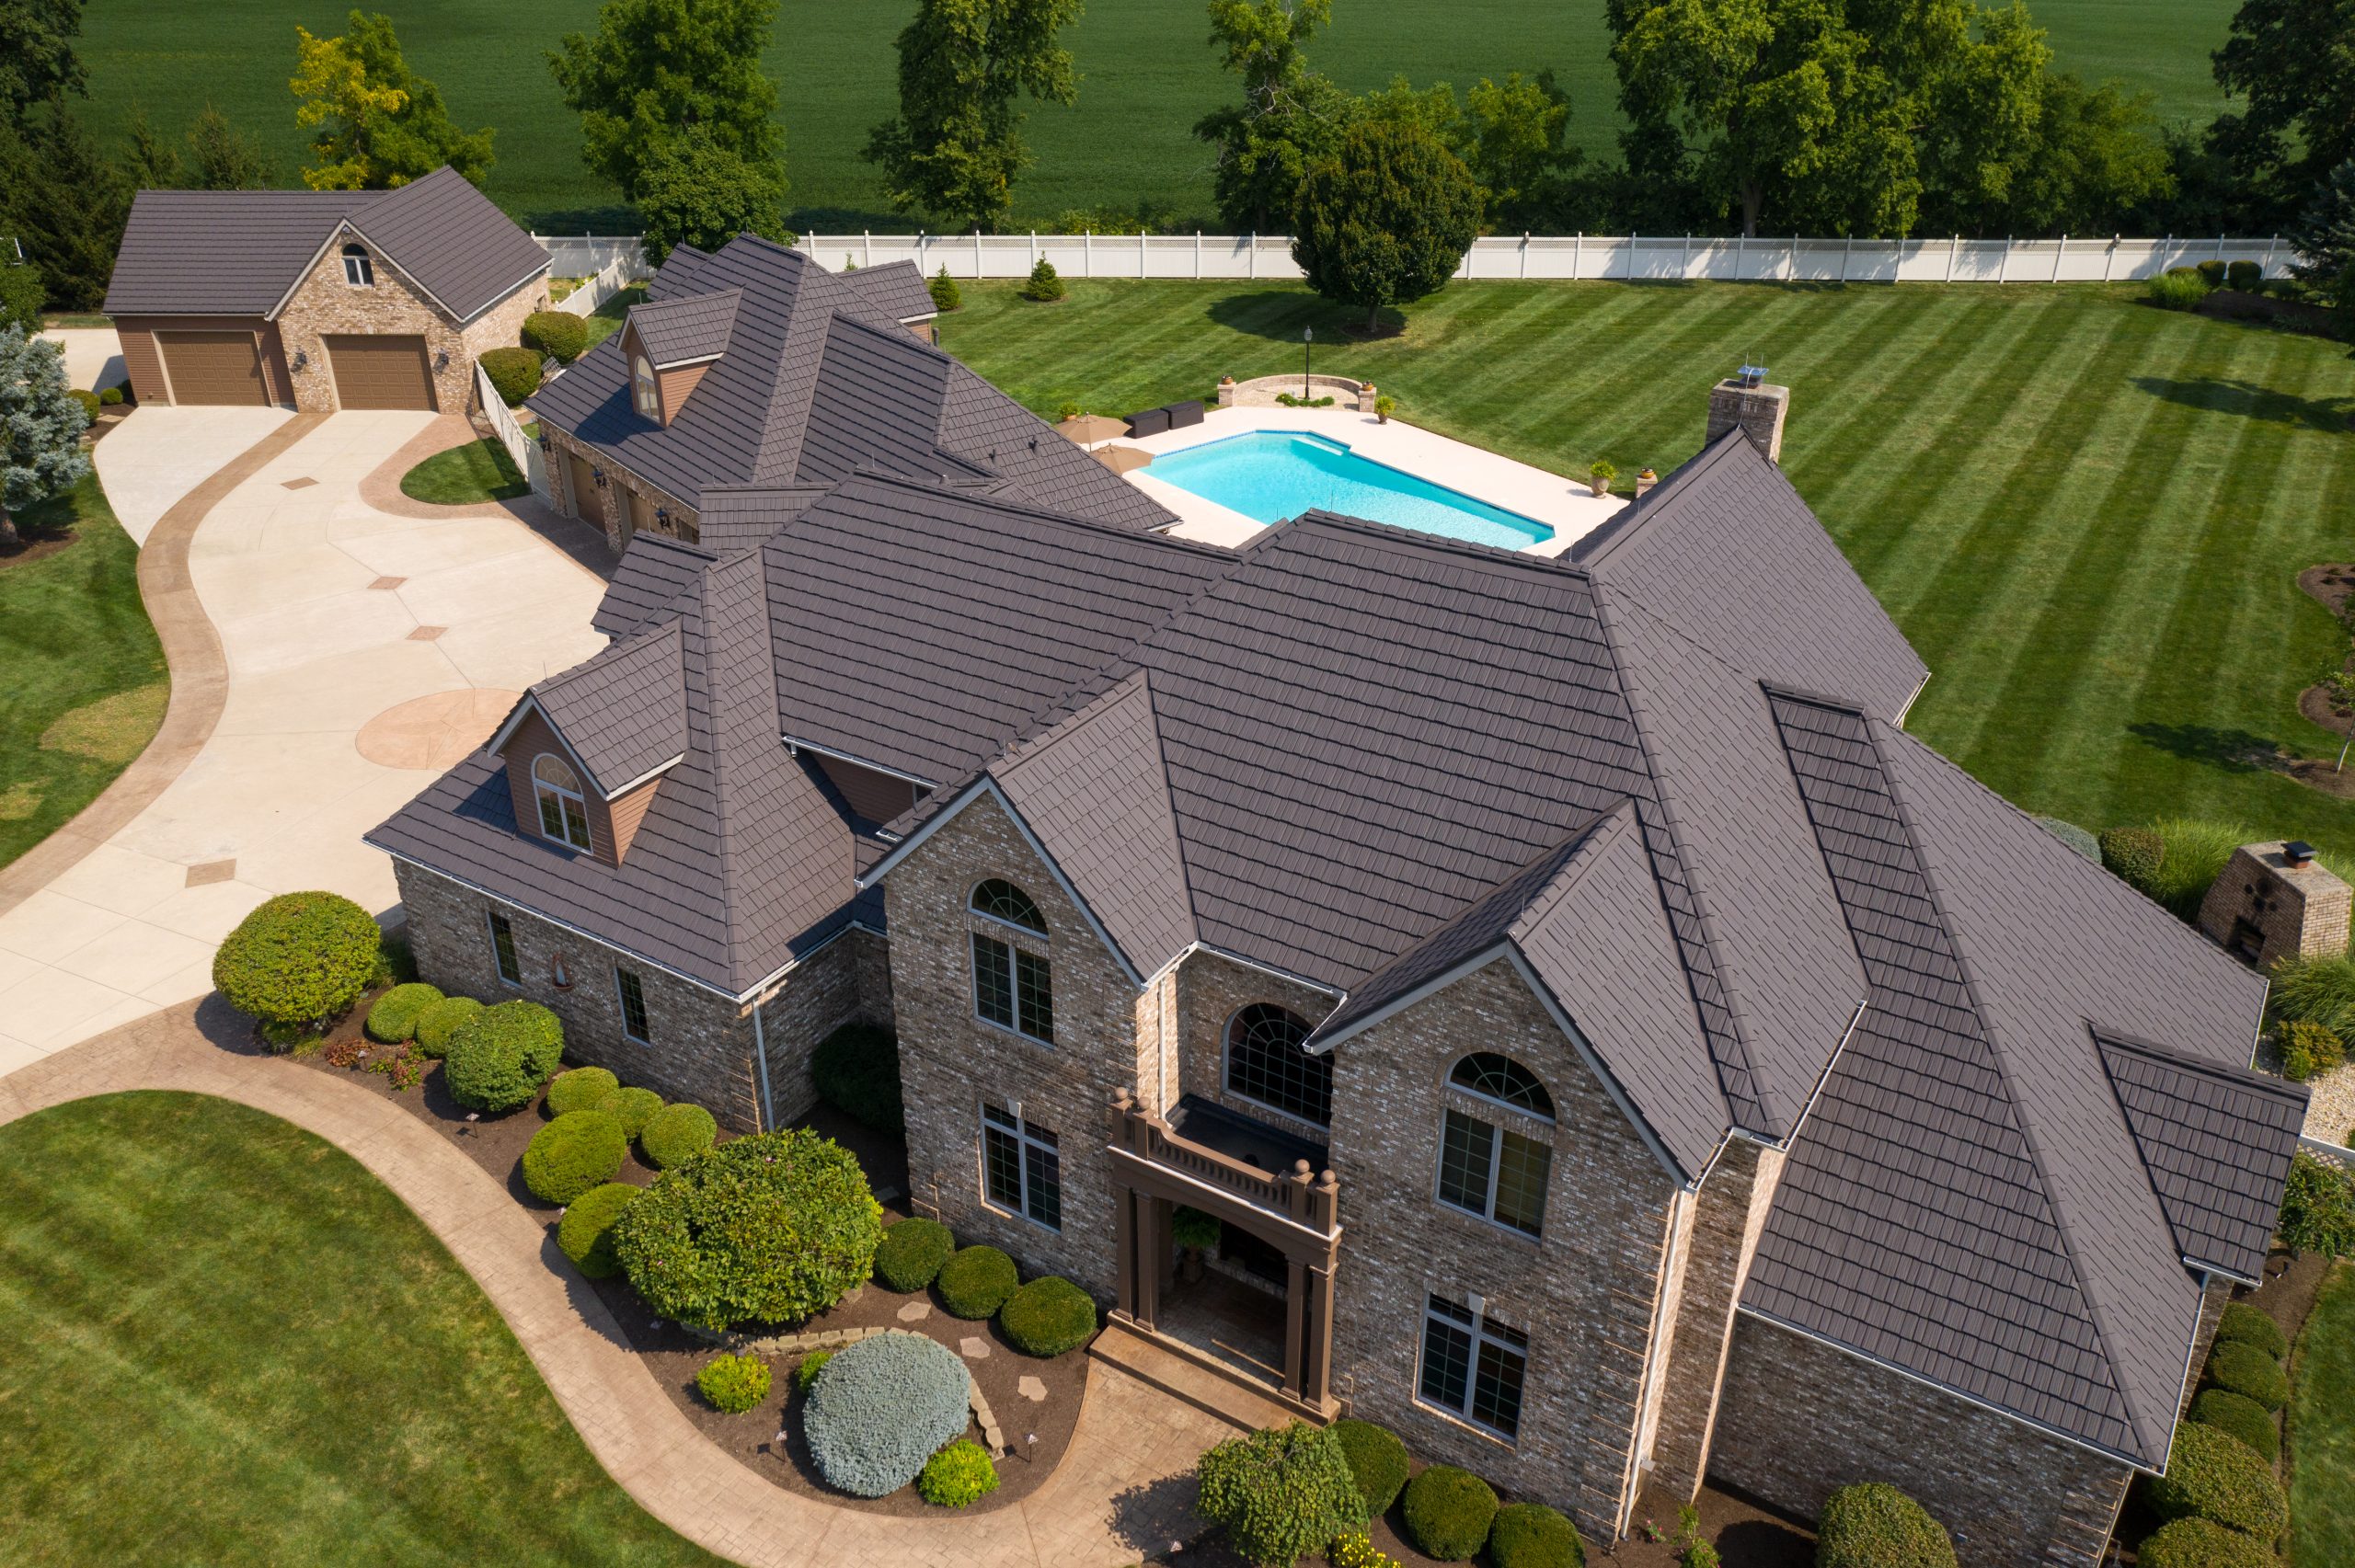 Industry Update: Residential Metal Roofing Continues to Make Strong Gains in the U.S.